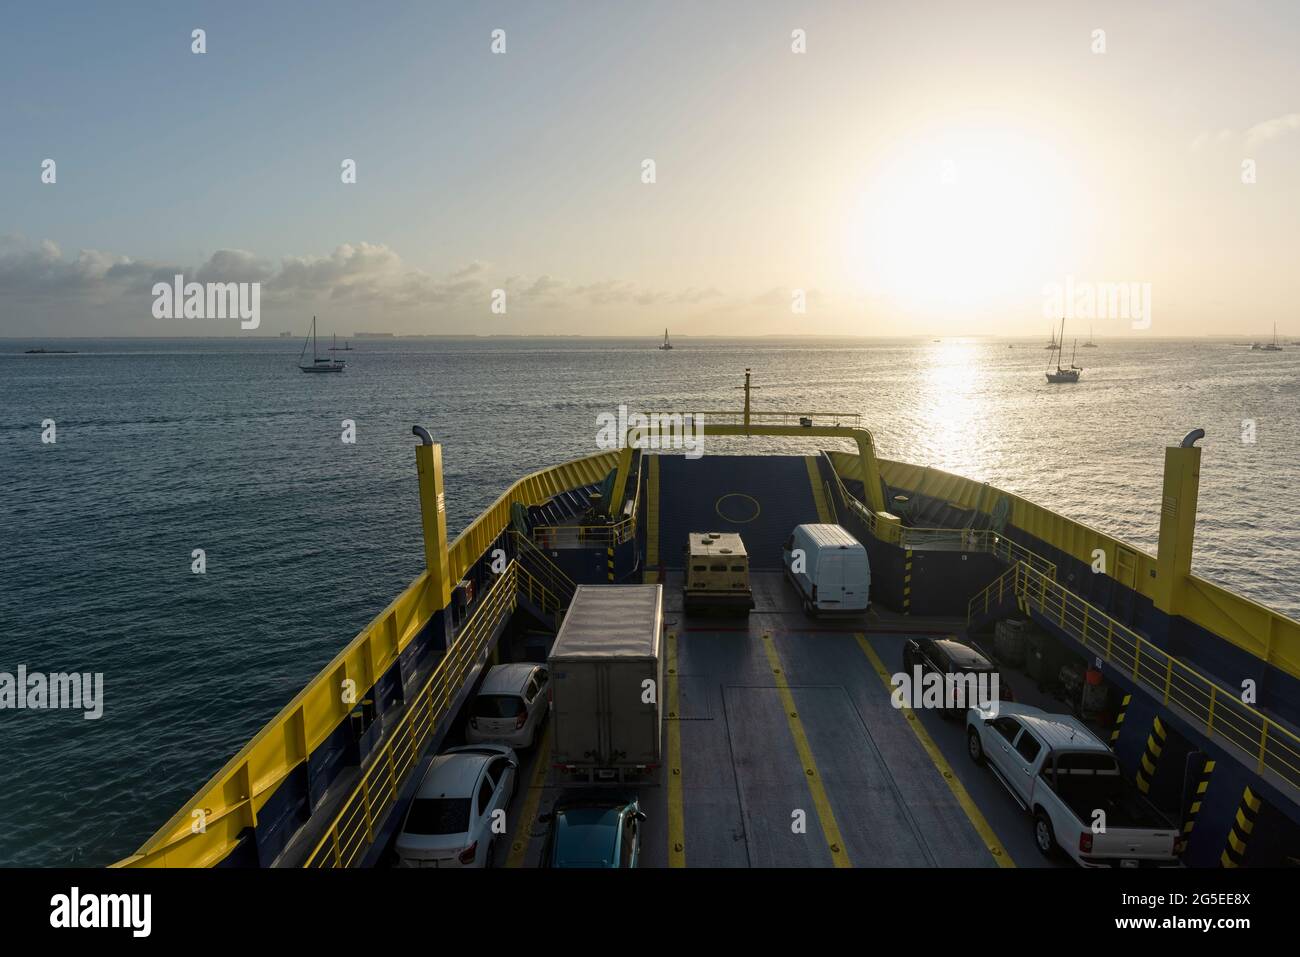 Open deck of a ferry with several vehicles on board, sailing near the coast of Cancun in Mexico Stock Photo